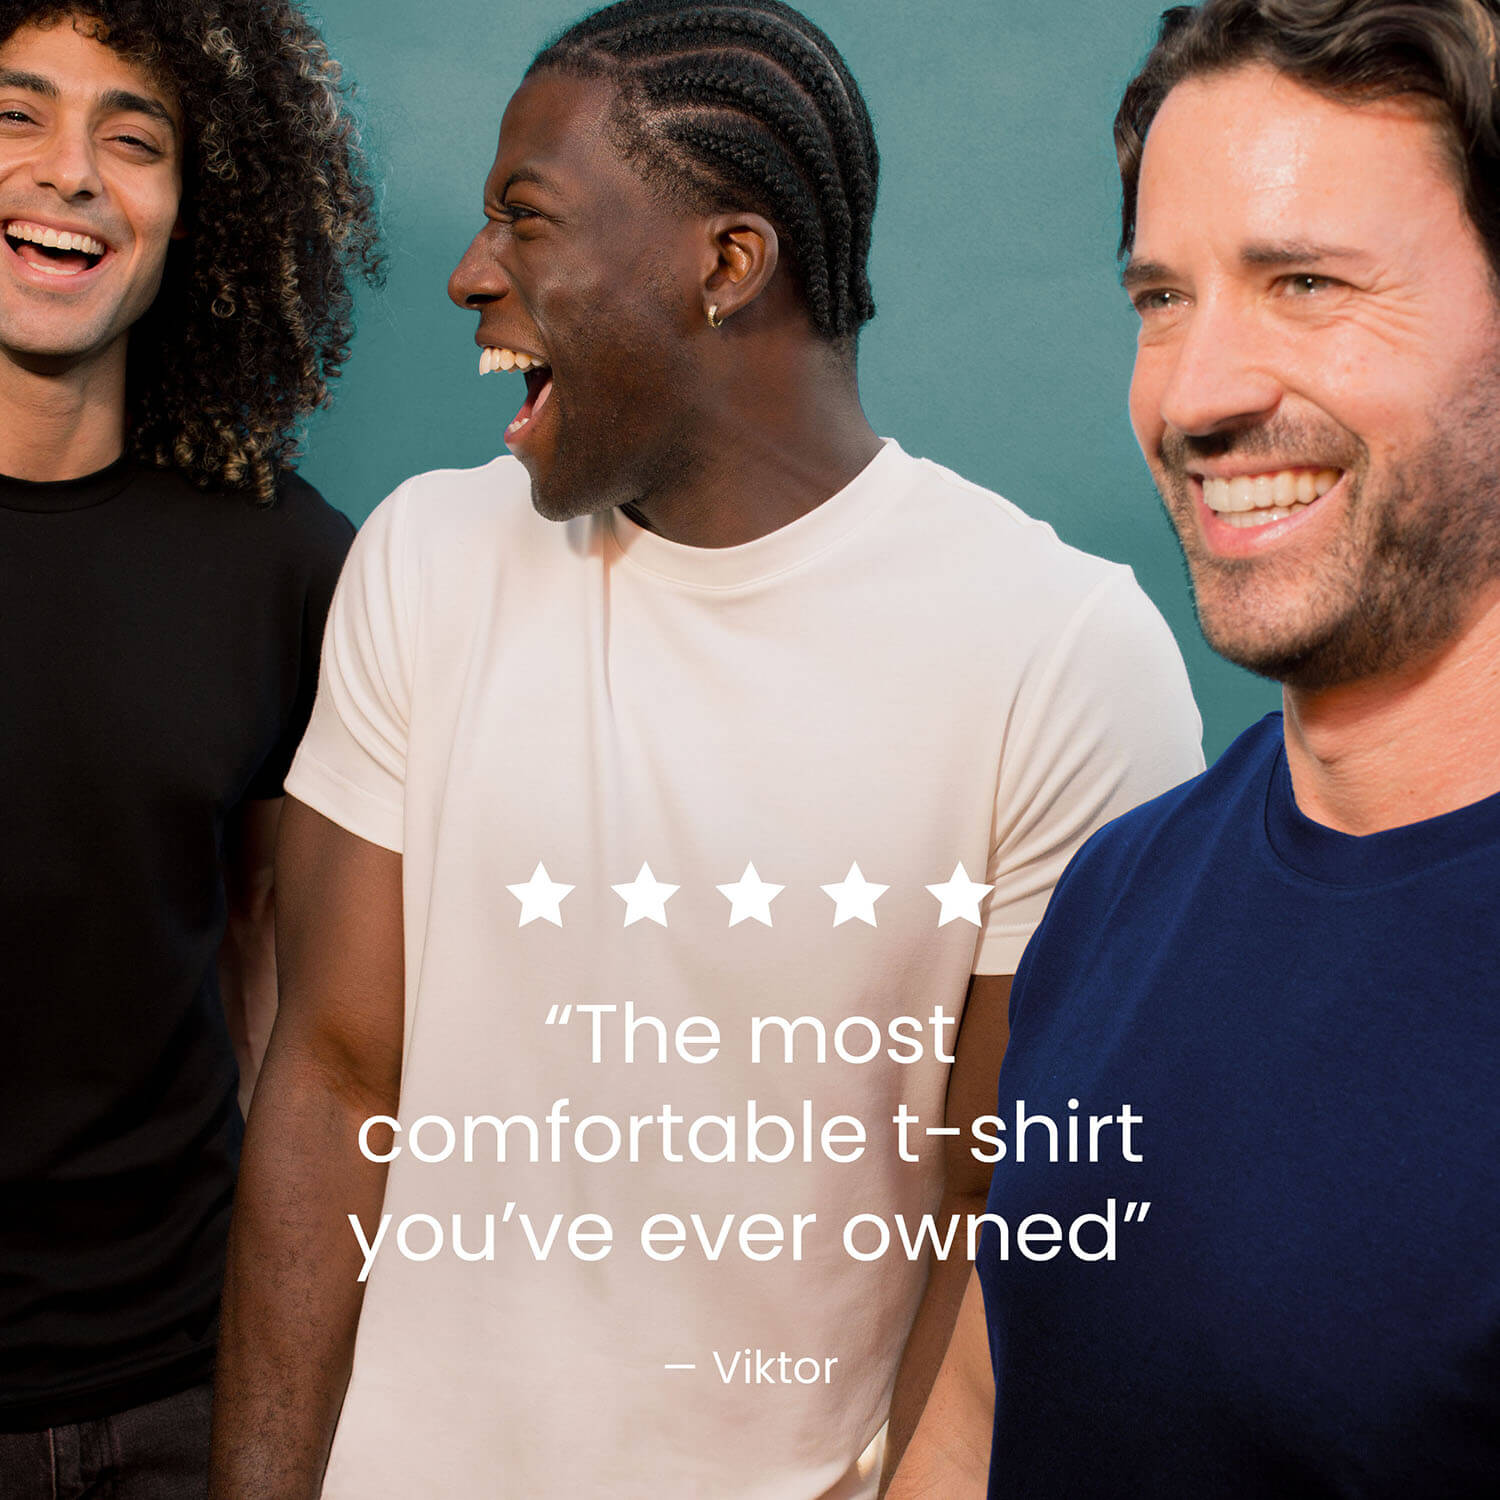 The Ultimate Comfort Tee - (color - Black)